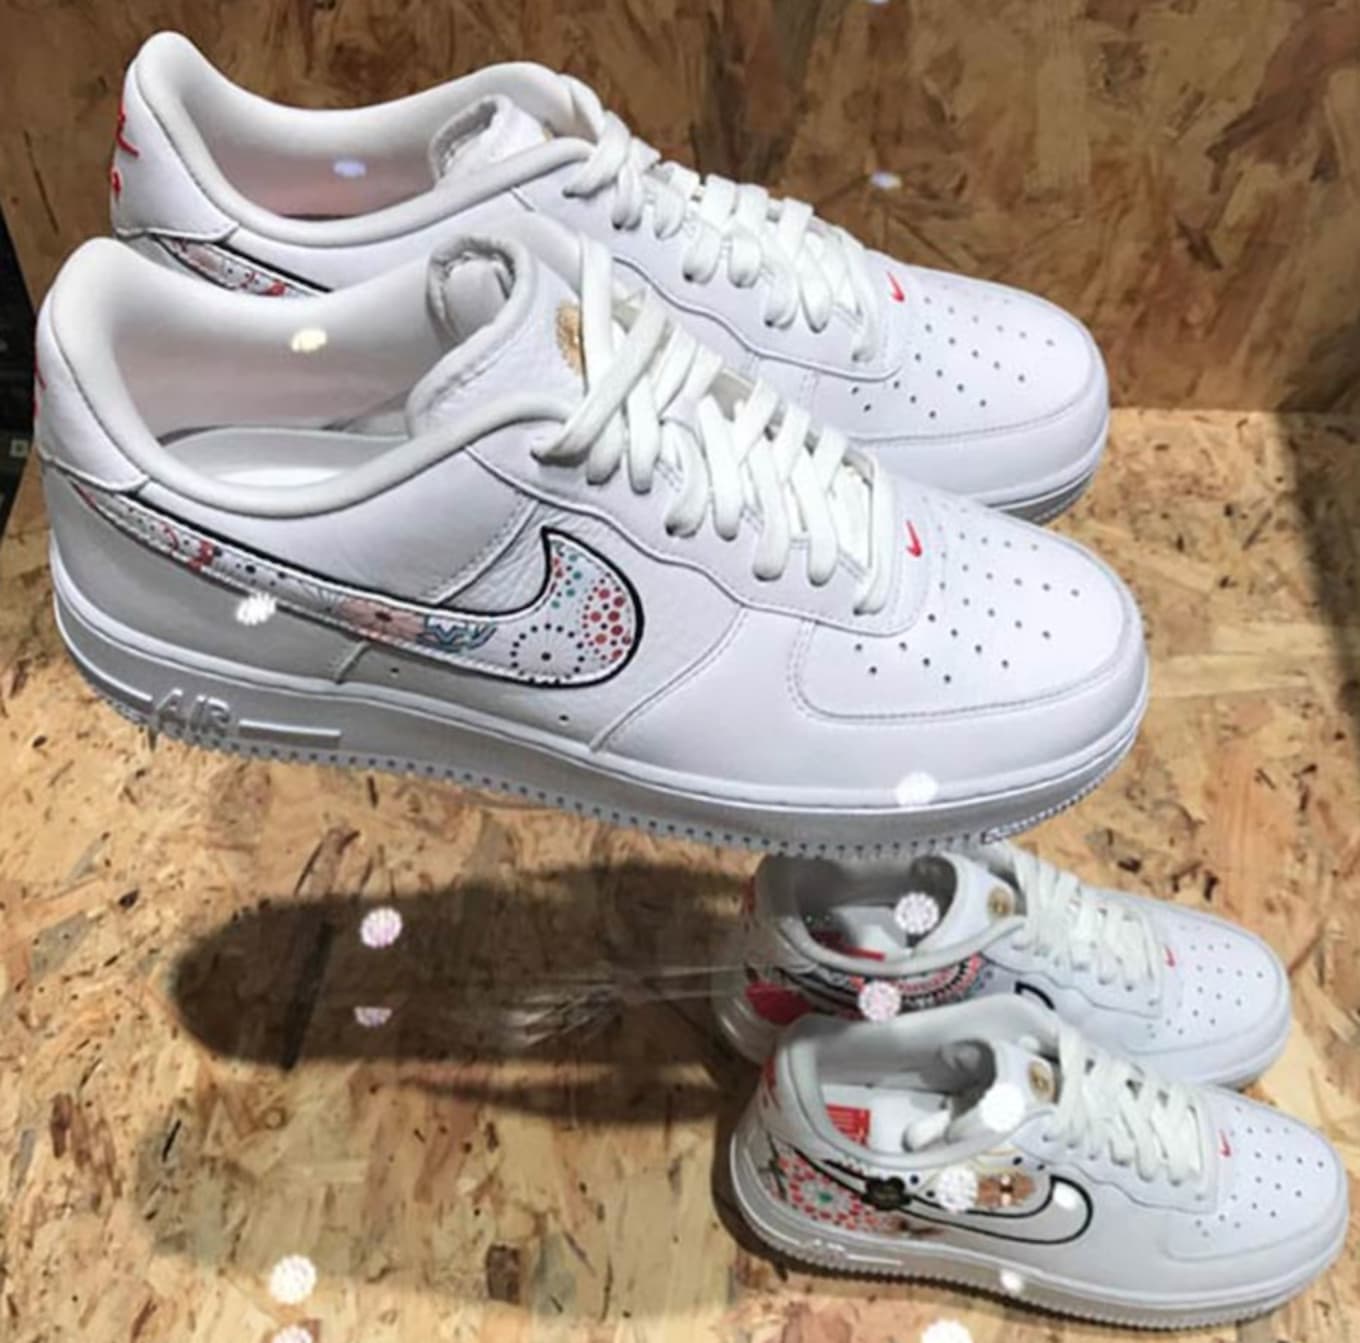 Investigación Comerciante itinerante pintar Nike Air Force 1 Low Chinese New Year 2018 | Sole Collector